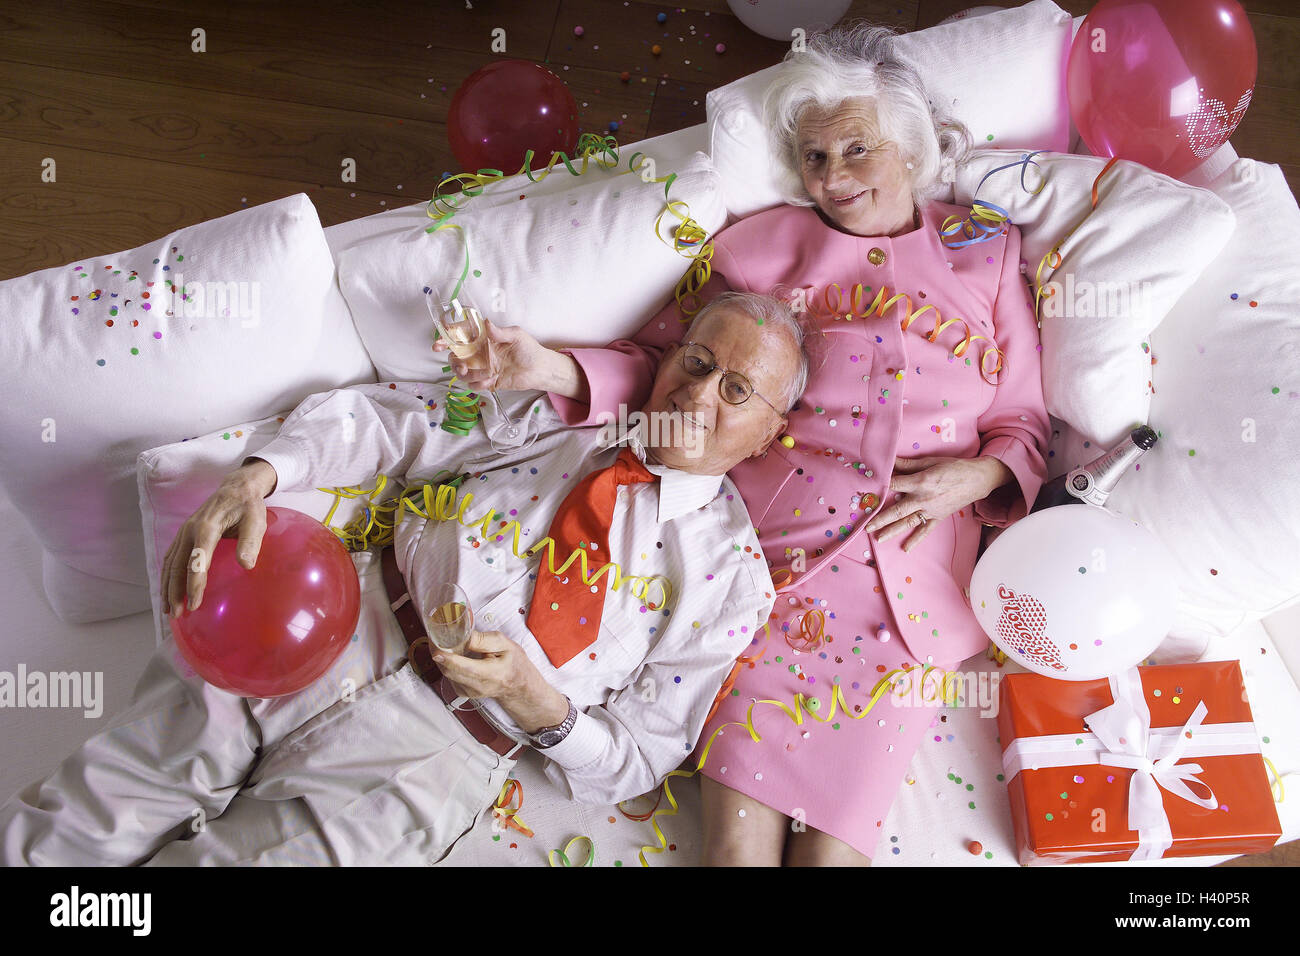 Sofa, senior pair, tipsily, confetti,  Balloons, gift, streamers,  from above Pair, seniors, pensioners, party, celebration, birthday celebration, ceremony, celebrates, together, relationship, partnership, affection, love, falls in love, happily, smiles, exhaustion, pause, rests, lies, champagne glasses, birthday, tenderness Stock Photo